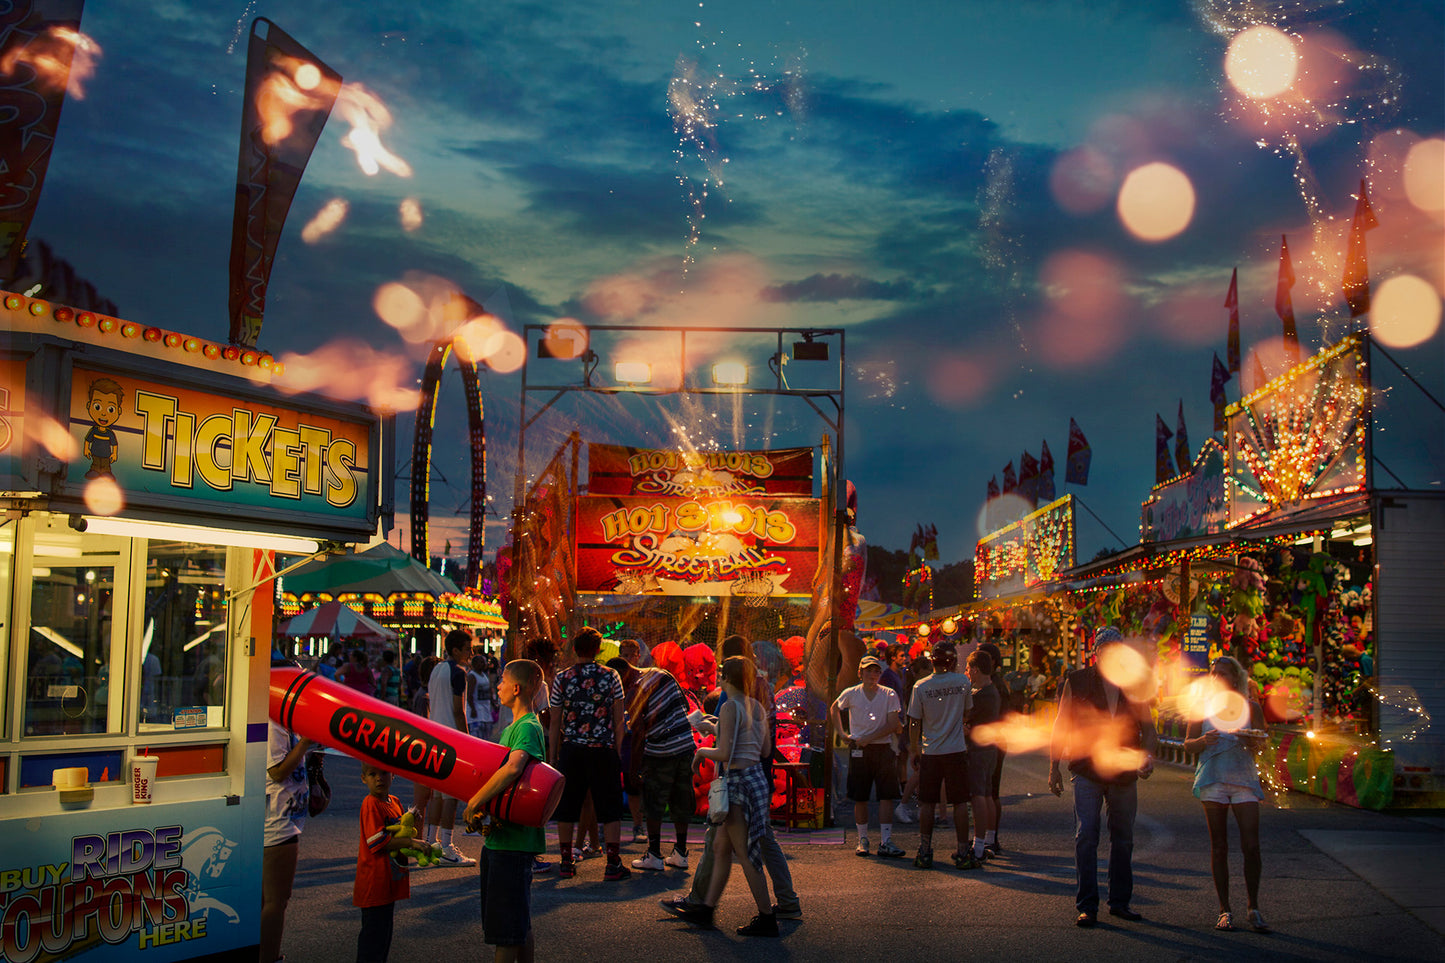 "Expected Wonder #2" by Shannon Black is a fine art photograph that captures the essence of the state fair, a place where people come together to revel in the joys of community, entertainment, and fun.